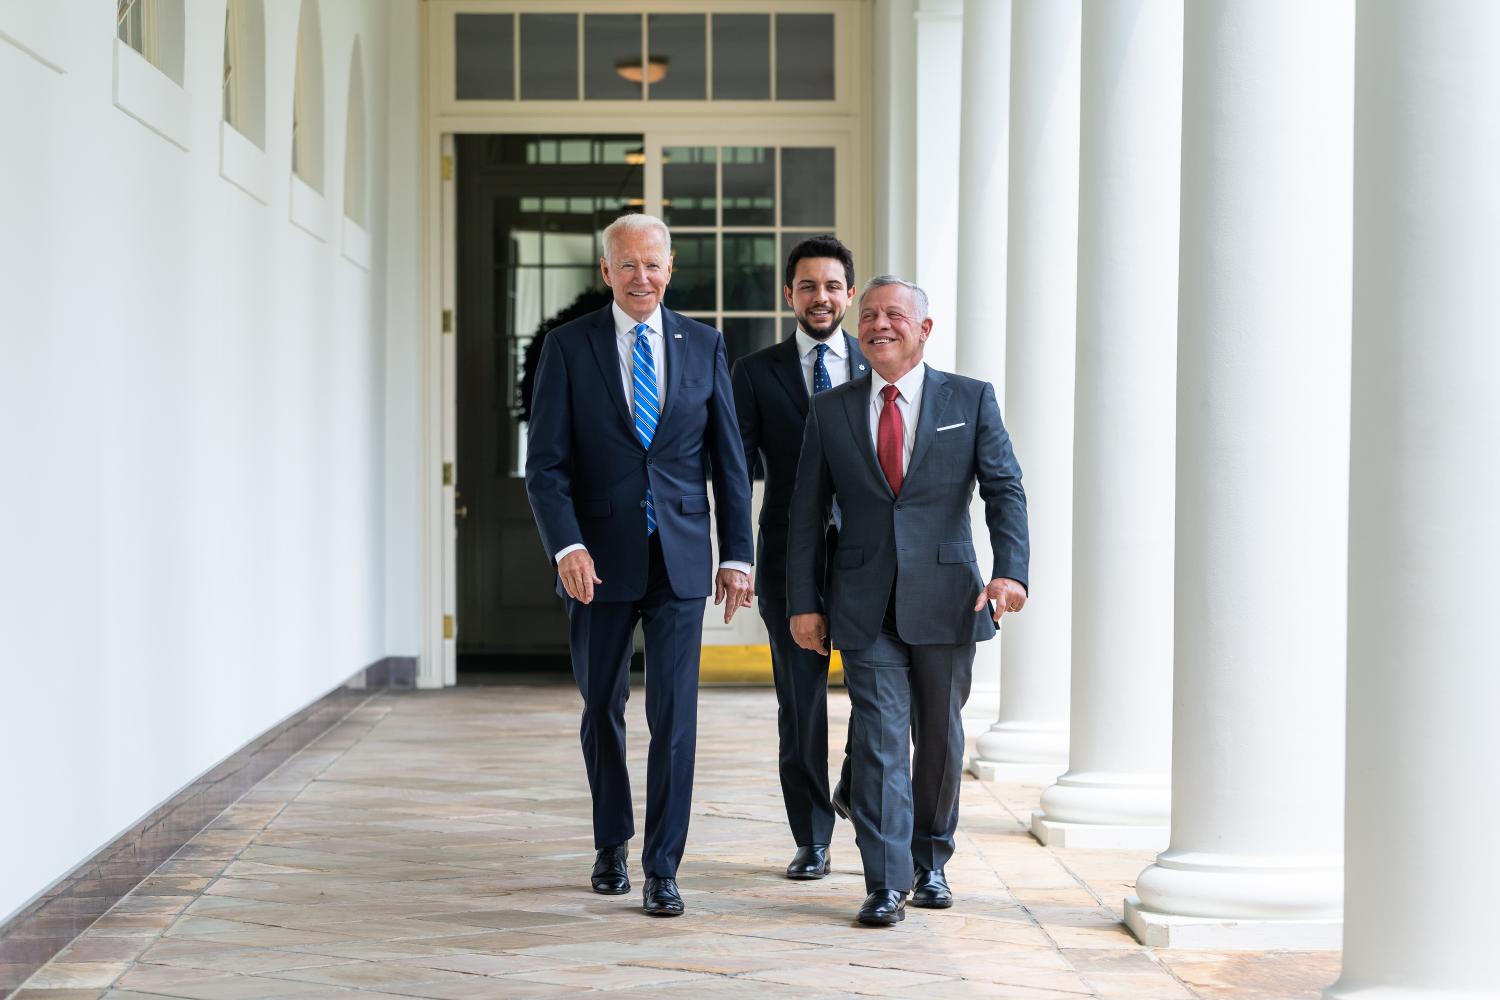 President Joe Biden, King Abdullah II and Crown Prince Al Hussein Bin Abdullah II of Jordan walk along the Colonnade of the White House on Monday, July 19, 2021, to the Oval Office. (Official White House Photo by Adam Schultz via Sipa USA)Please note: Fees charged by the agency are for the agencys services only, and do not, nor are they intended to, convey to the user any ownership of Copyright or License in the material. The agency does not claim any ownership including but not limited to Copyright or License in the attached material. By publishing this material you expressly agree to indemnify and to hold the agency and its directors, shareholders and employees harmless from any loss, claims, damages, demands, expenses (including legal fees), or any causes of action or allegation against the agency arising out of or connected in any way with publication of the material.No Use Germany.